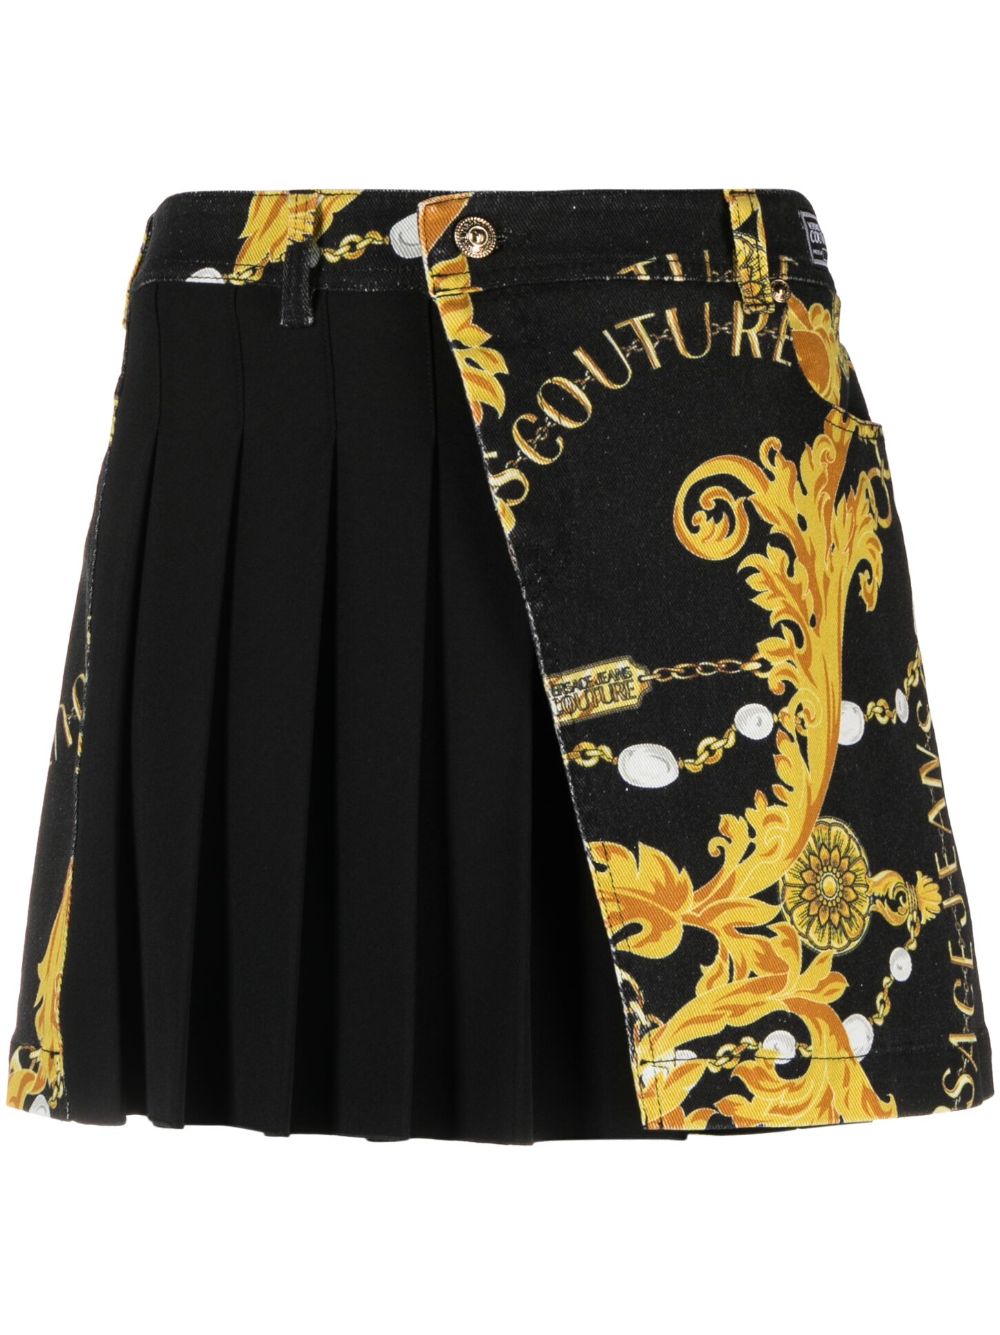 VERSACE JEANS COUTURE LOGO COUTURE PLEATED DENIM SKIRT